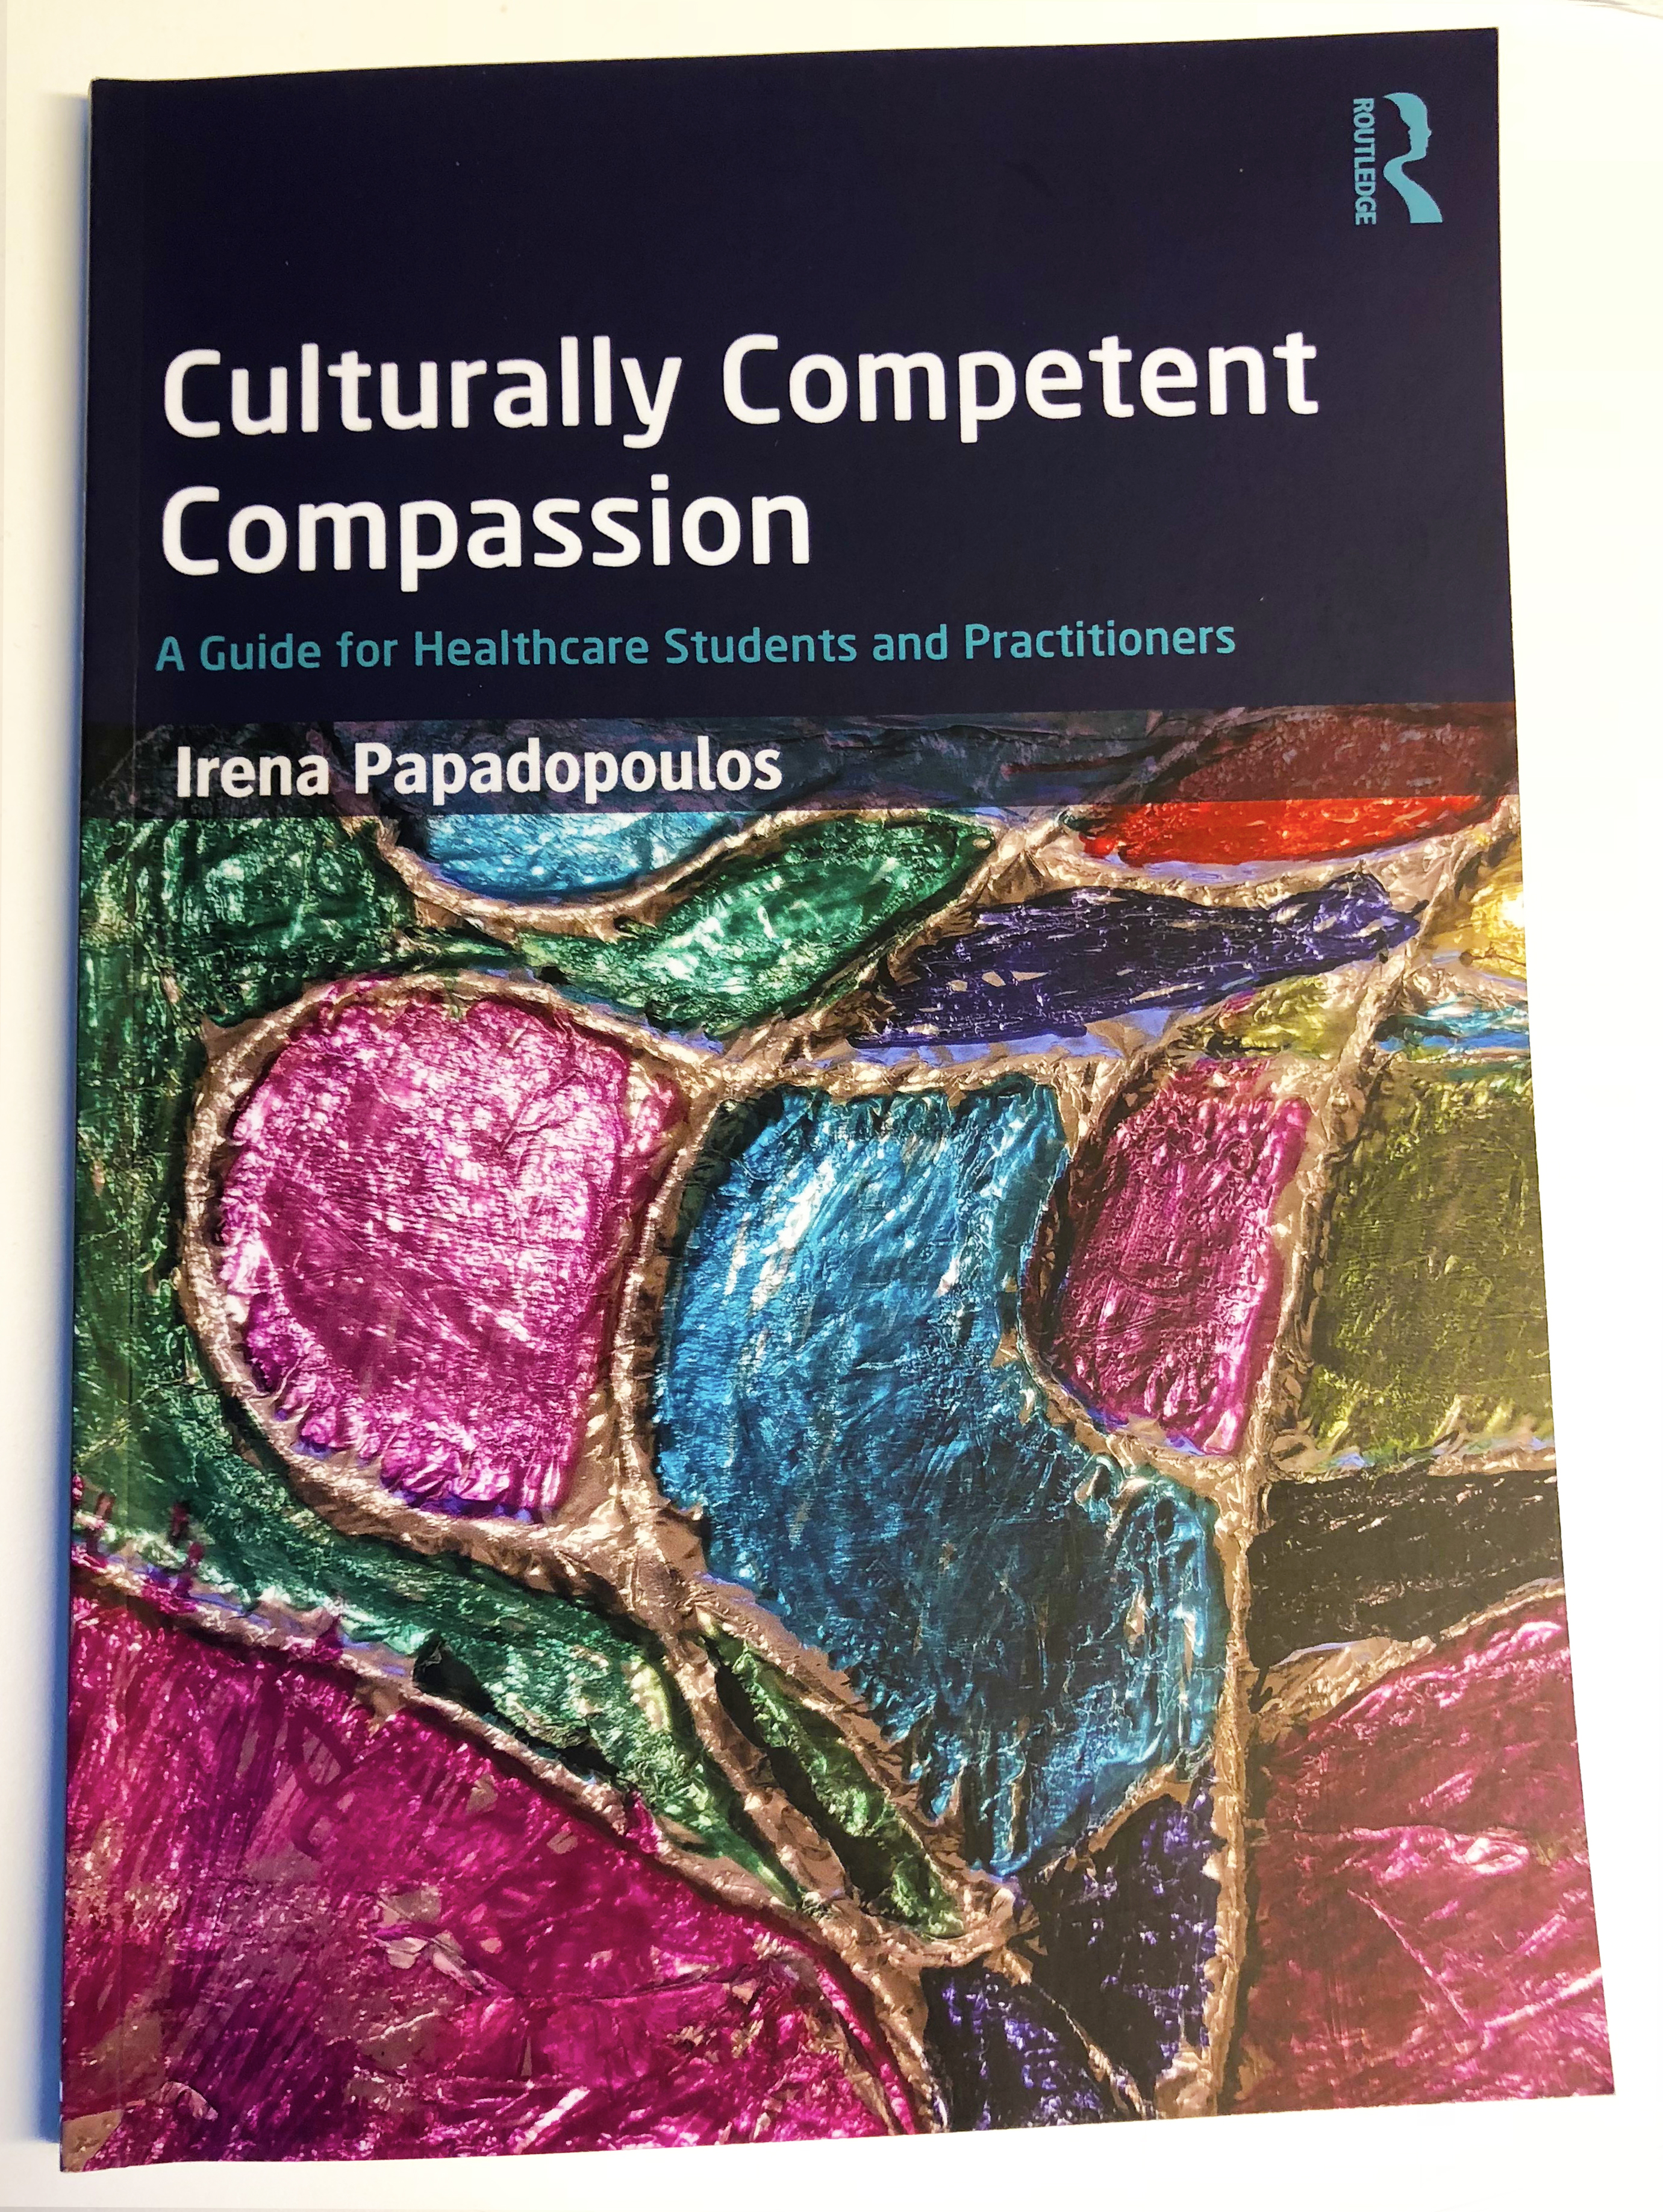 New book: Culturally competent compassion